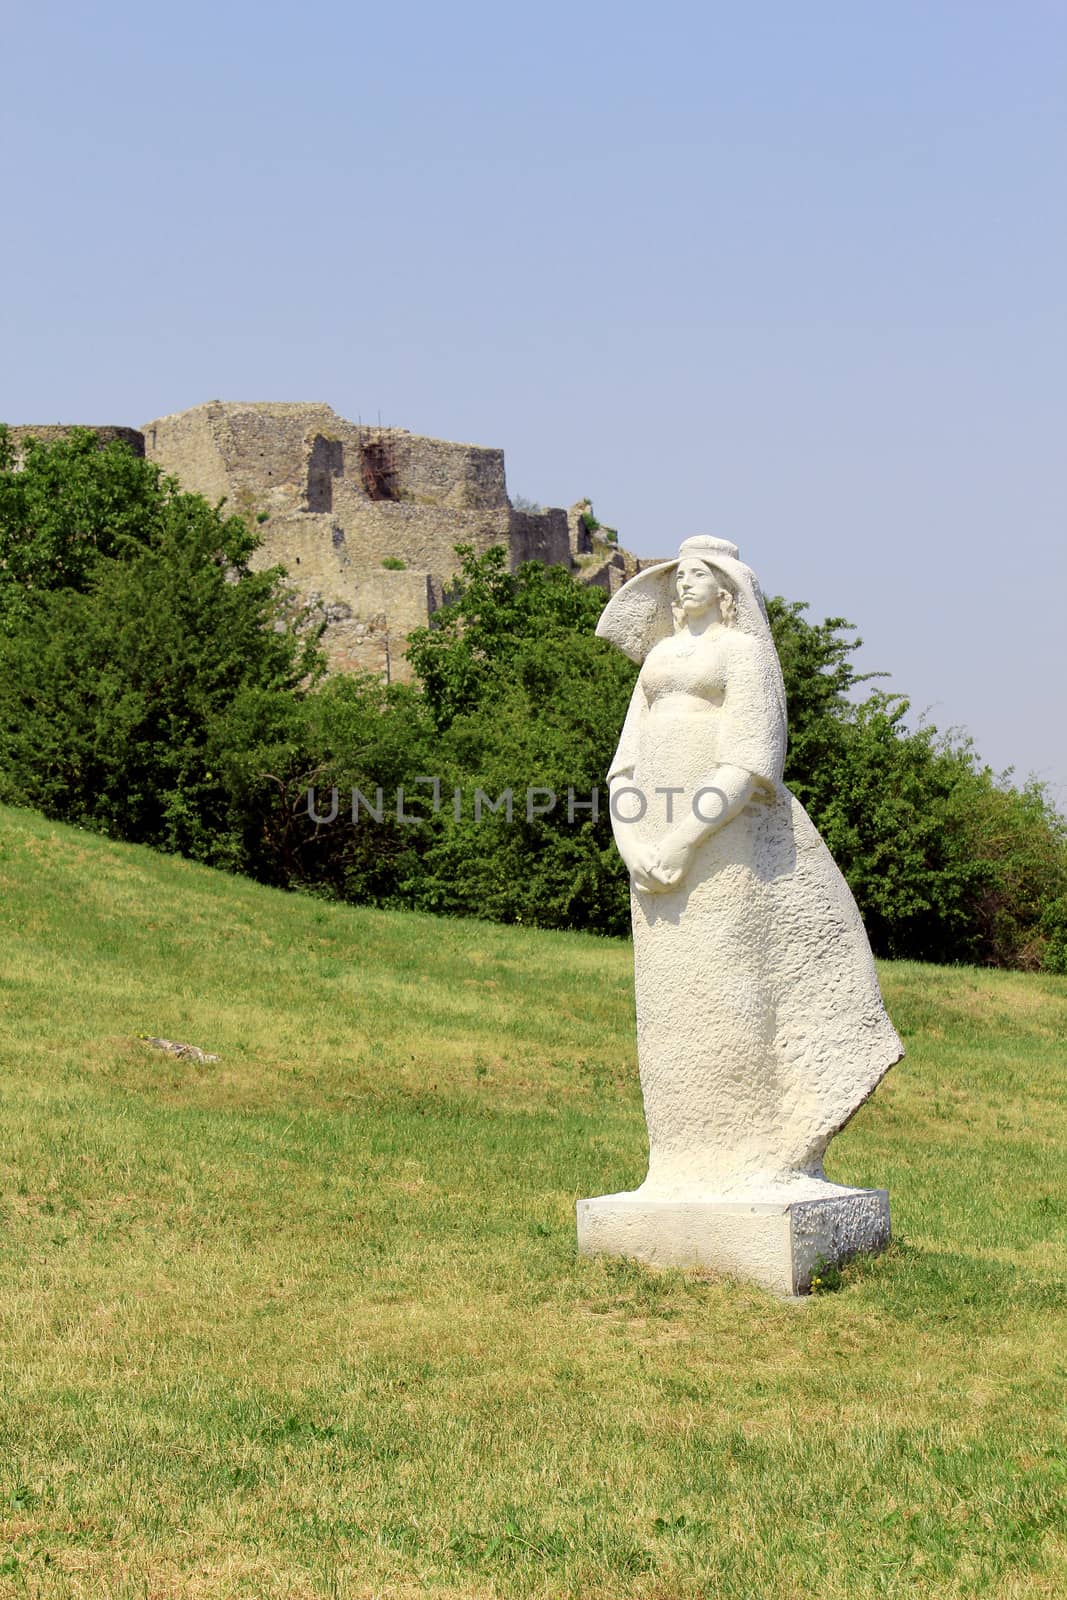 Devin castle near Bratislava (at the border with Austria), white woman sculpture part of the castle art in foreground